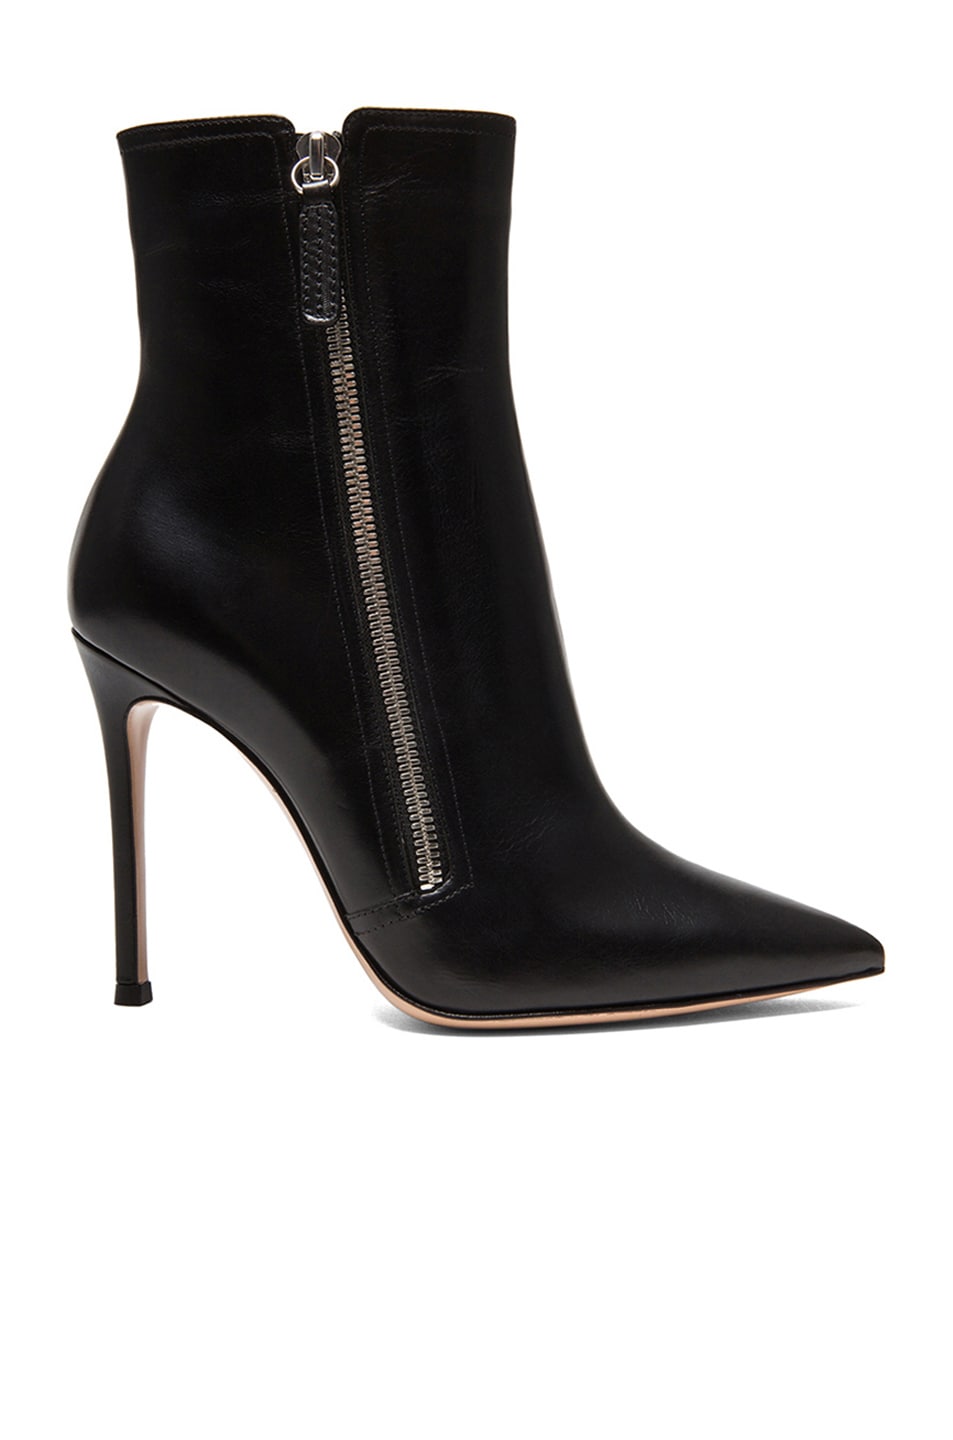 Gianvito Rossi Pointed Leather Ankle Boots in Black | FWRD